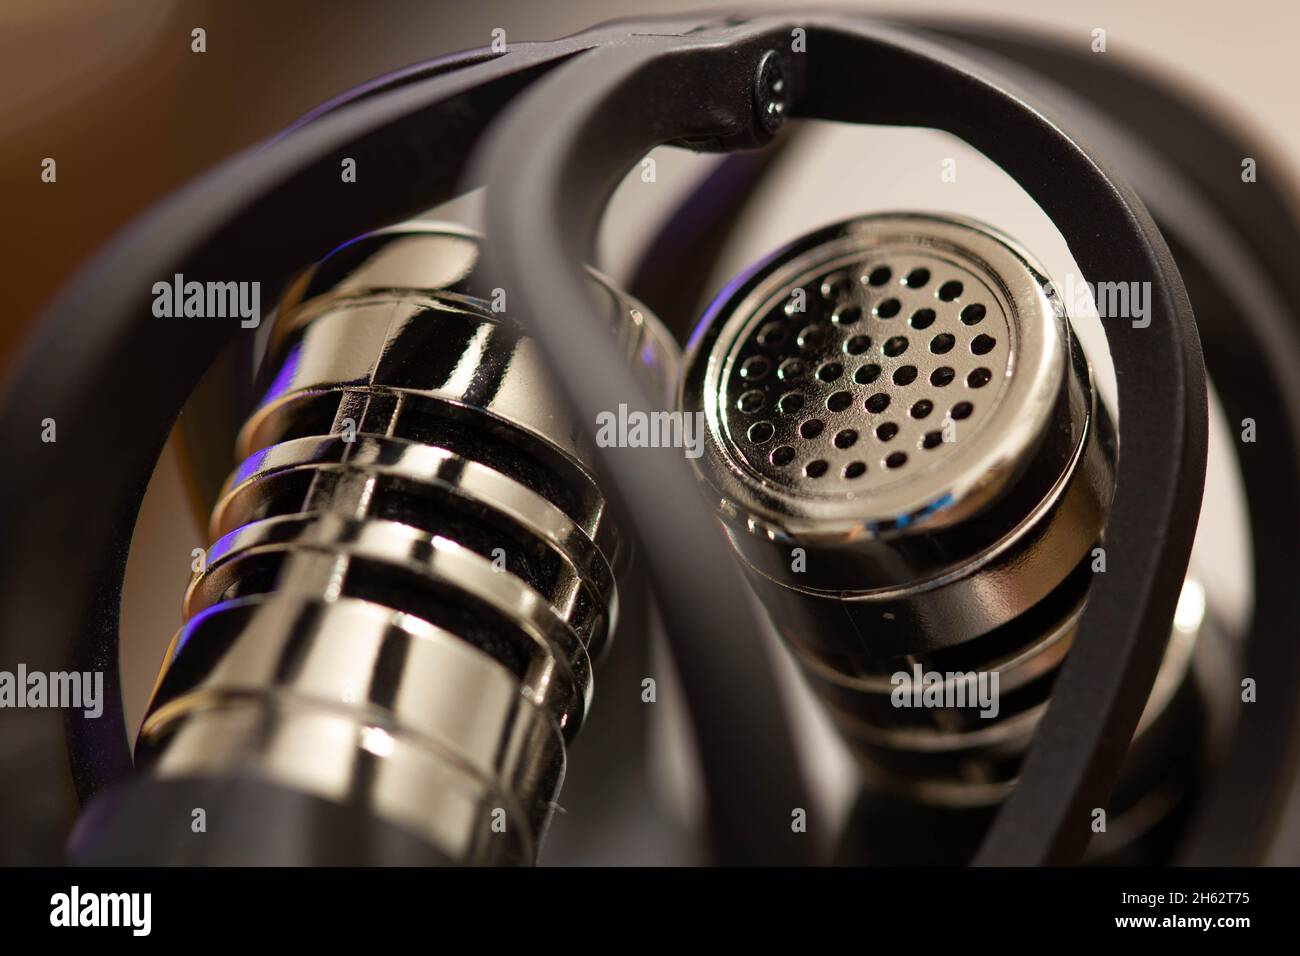 Stereo Microphones. Compact audio recorder in a music studio. Built-In portable dictaphone for recording. Metallic chrome plated microphone. Digital Stock Photo